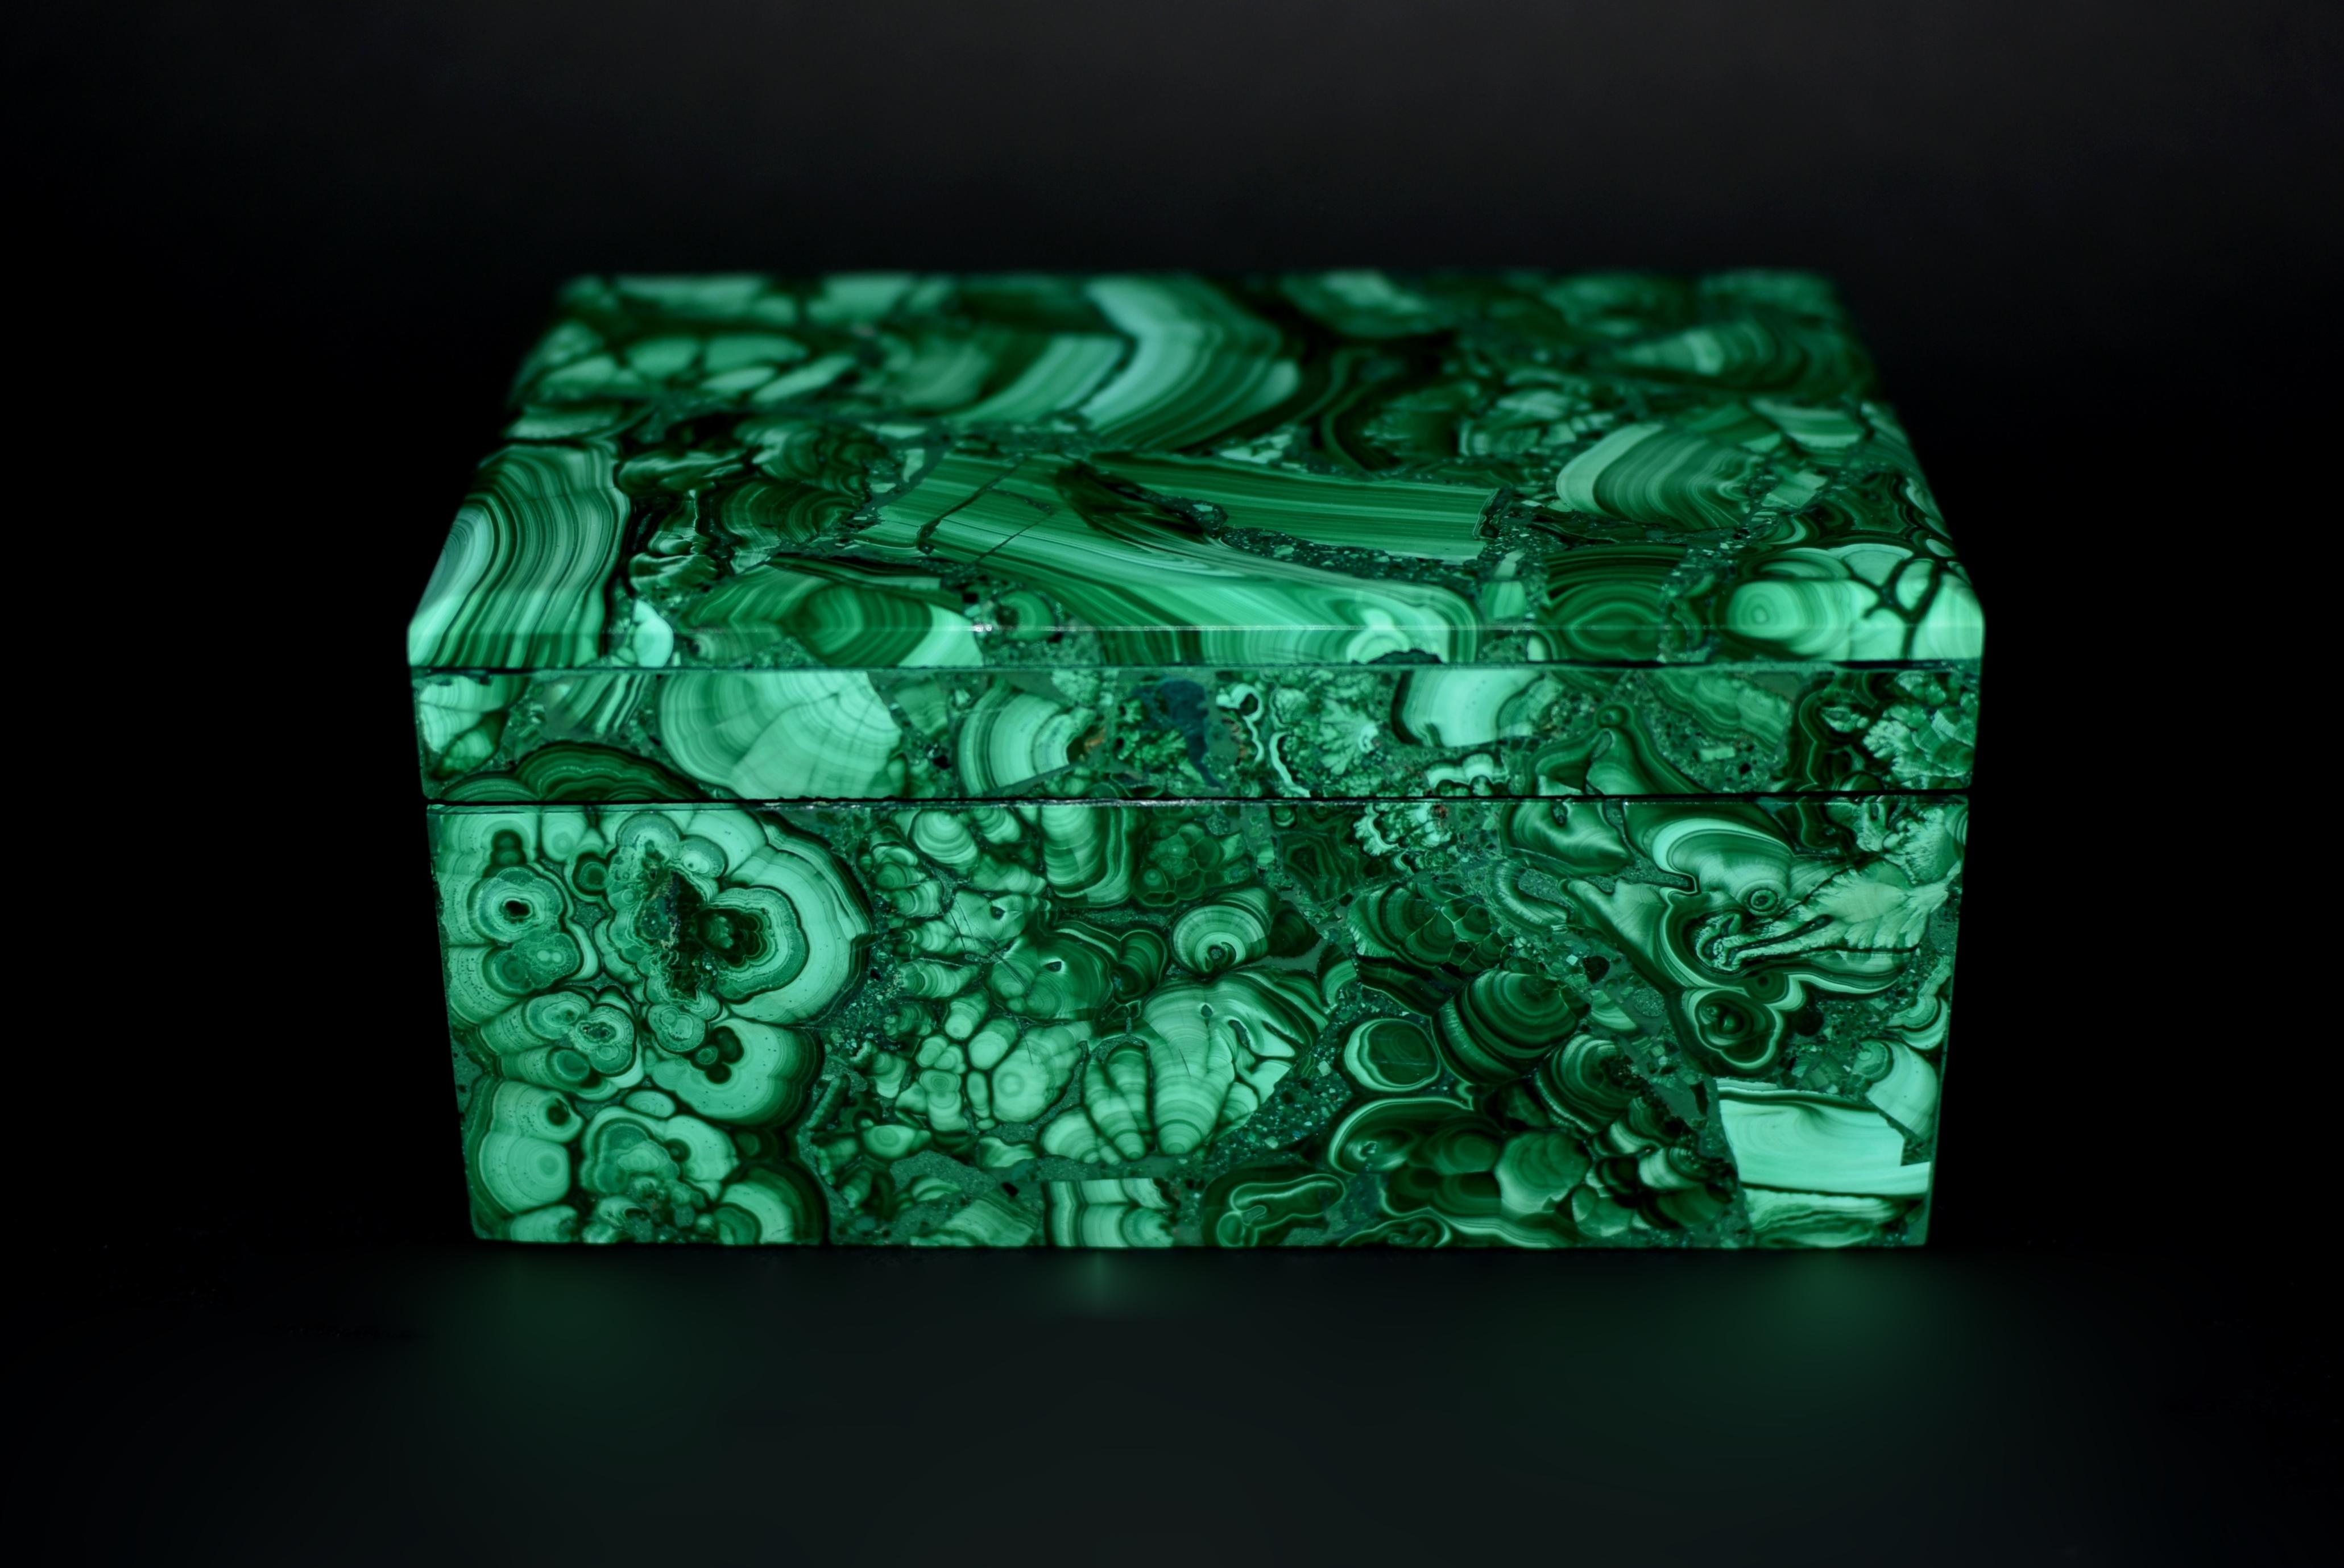 Absolutely beautiful 3 lb full-slab all natural malachite box. No liners, no veneer, just gemstone malachite. A remarkable objet d'art of quality, luxury and sophistication. Meticulously hand crafted with beveled edges and polished to a beautiful